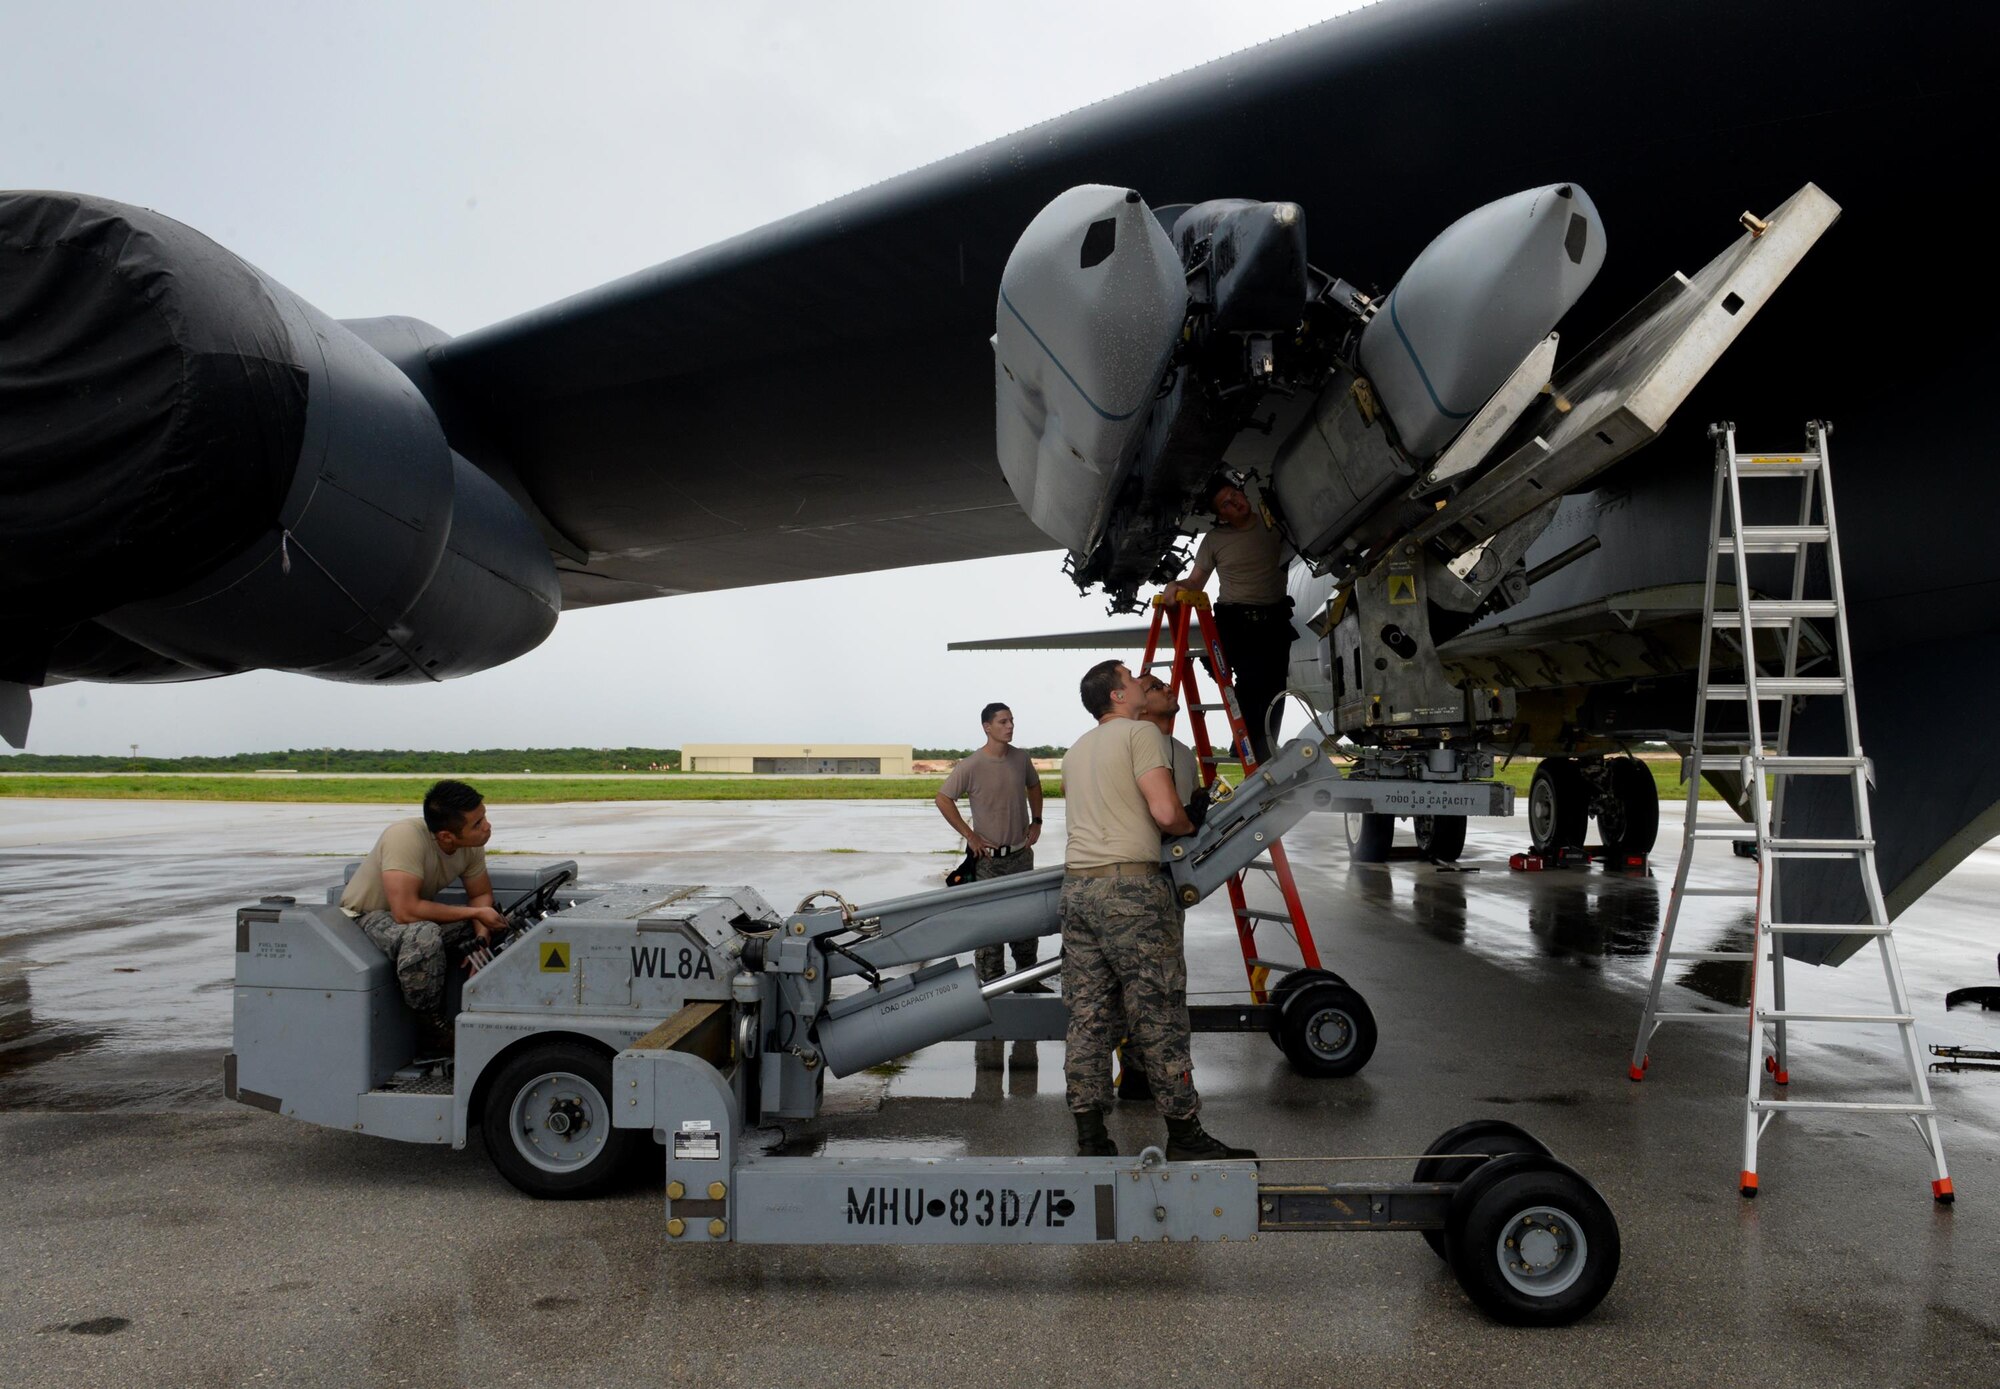 Airmen assigned to the 36th Expeditionary Aircraft Maintenance Squadron load an inert AGM-158 Joint Air-to-Surface Standoff Missile onto a B-52H Stratofortress during a munitions loading exercise July 13, 2016, at Andersen Air Force Base, Guam. The U.S. Pacific Command has maintained a rotational strategic bomber presence in the region for more than a decade. These aircraft and the men and women who fly and support them provide a significant capability that enables U.S. readiness and commitment to deterrence, provides assurances to allies, and strengthens regional security and stability in the Indo-Asia-Pacific region. 
(U.S. Air Force photo by Airman 1st Class Alexa Ann Henderson/Released)
